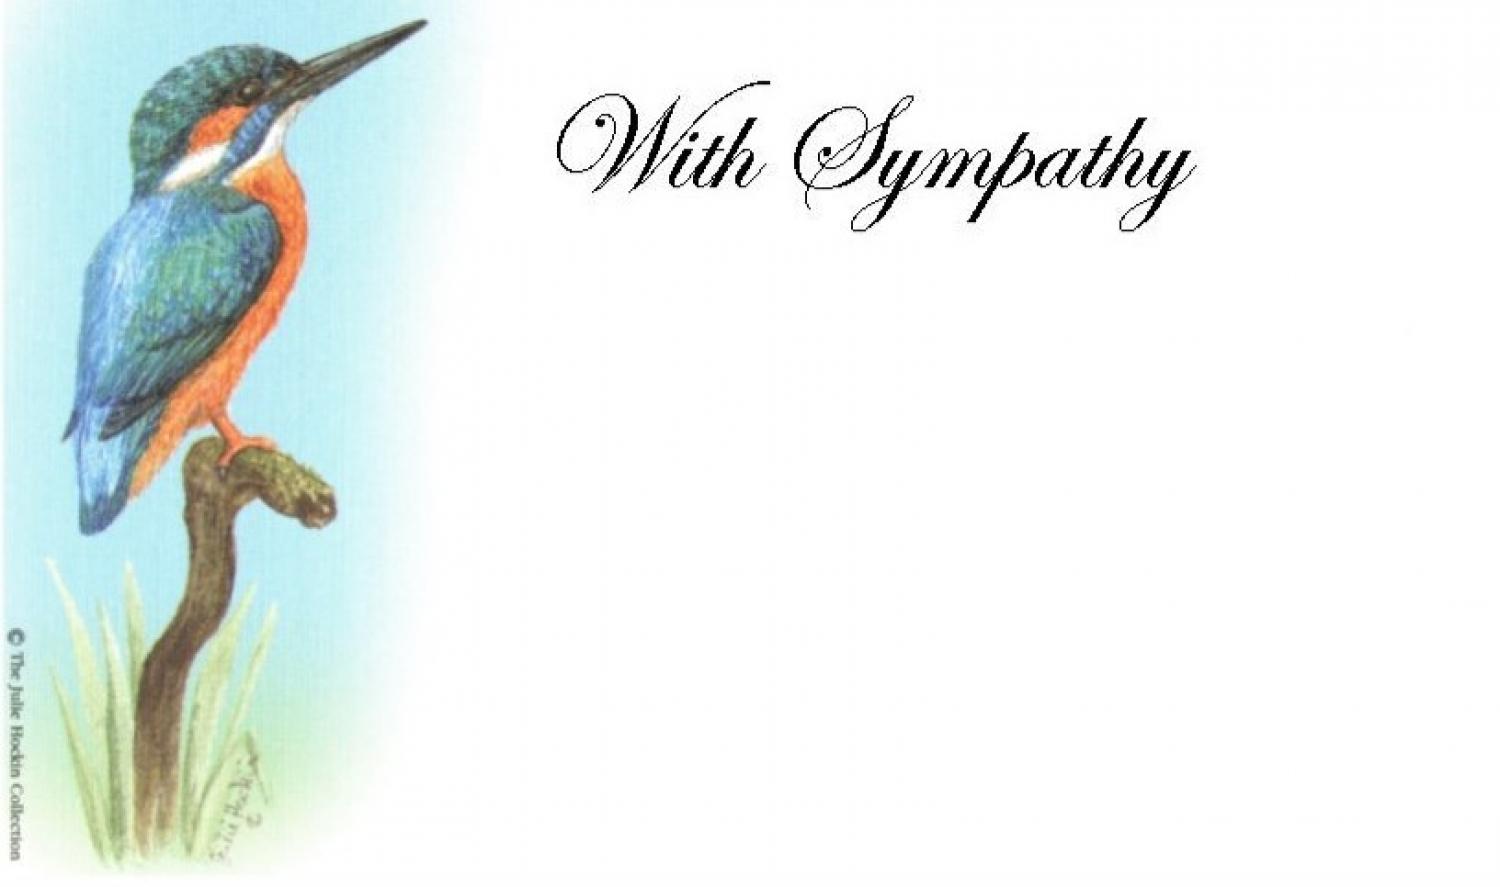 With Sympathy Card - Kingfisher